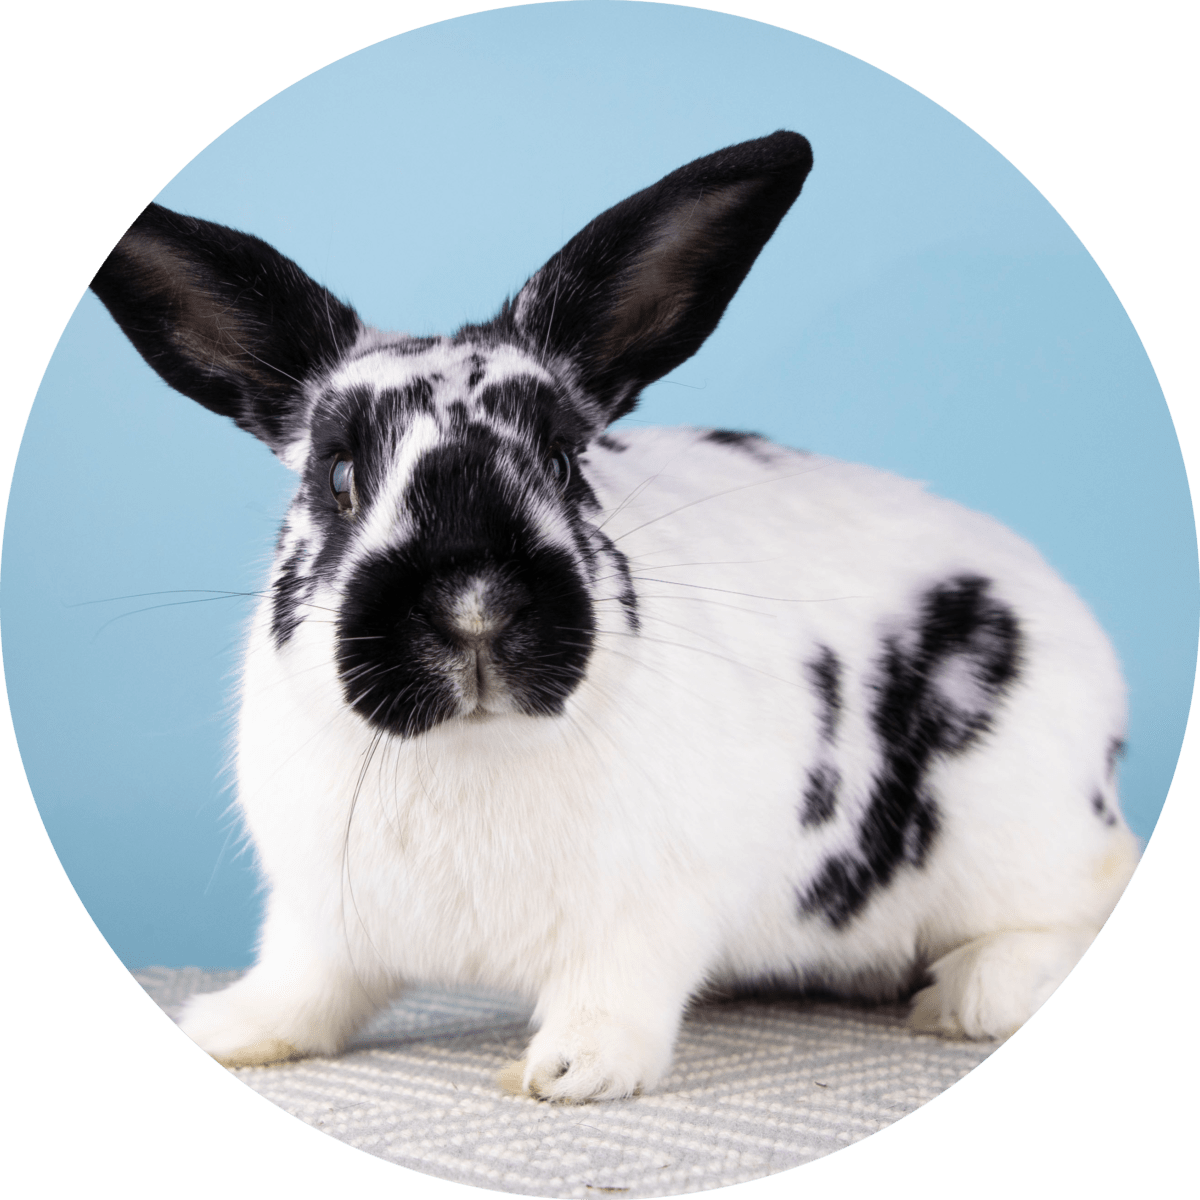 Home - Long Island Rabbit Rescue Group